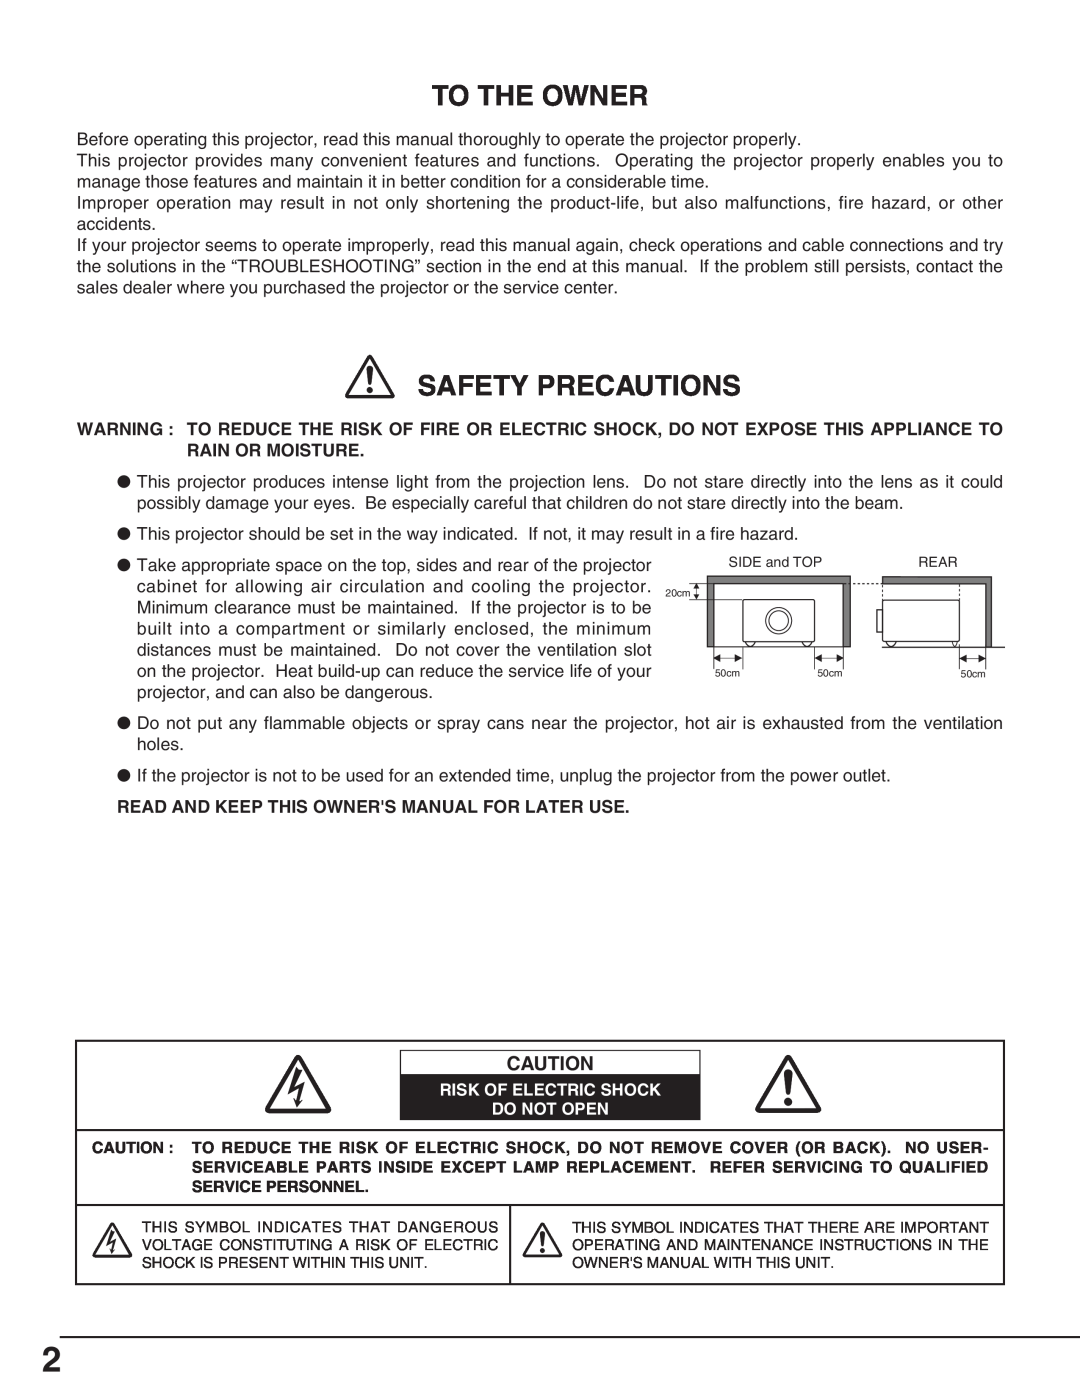 Canon LV-X2 owner manual To The Owner, Safety Precautions, Read And Keep This Owners Manual For Later Use 